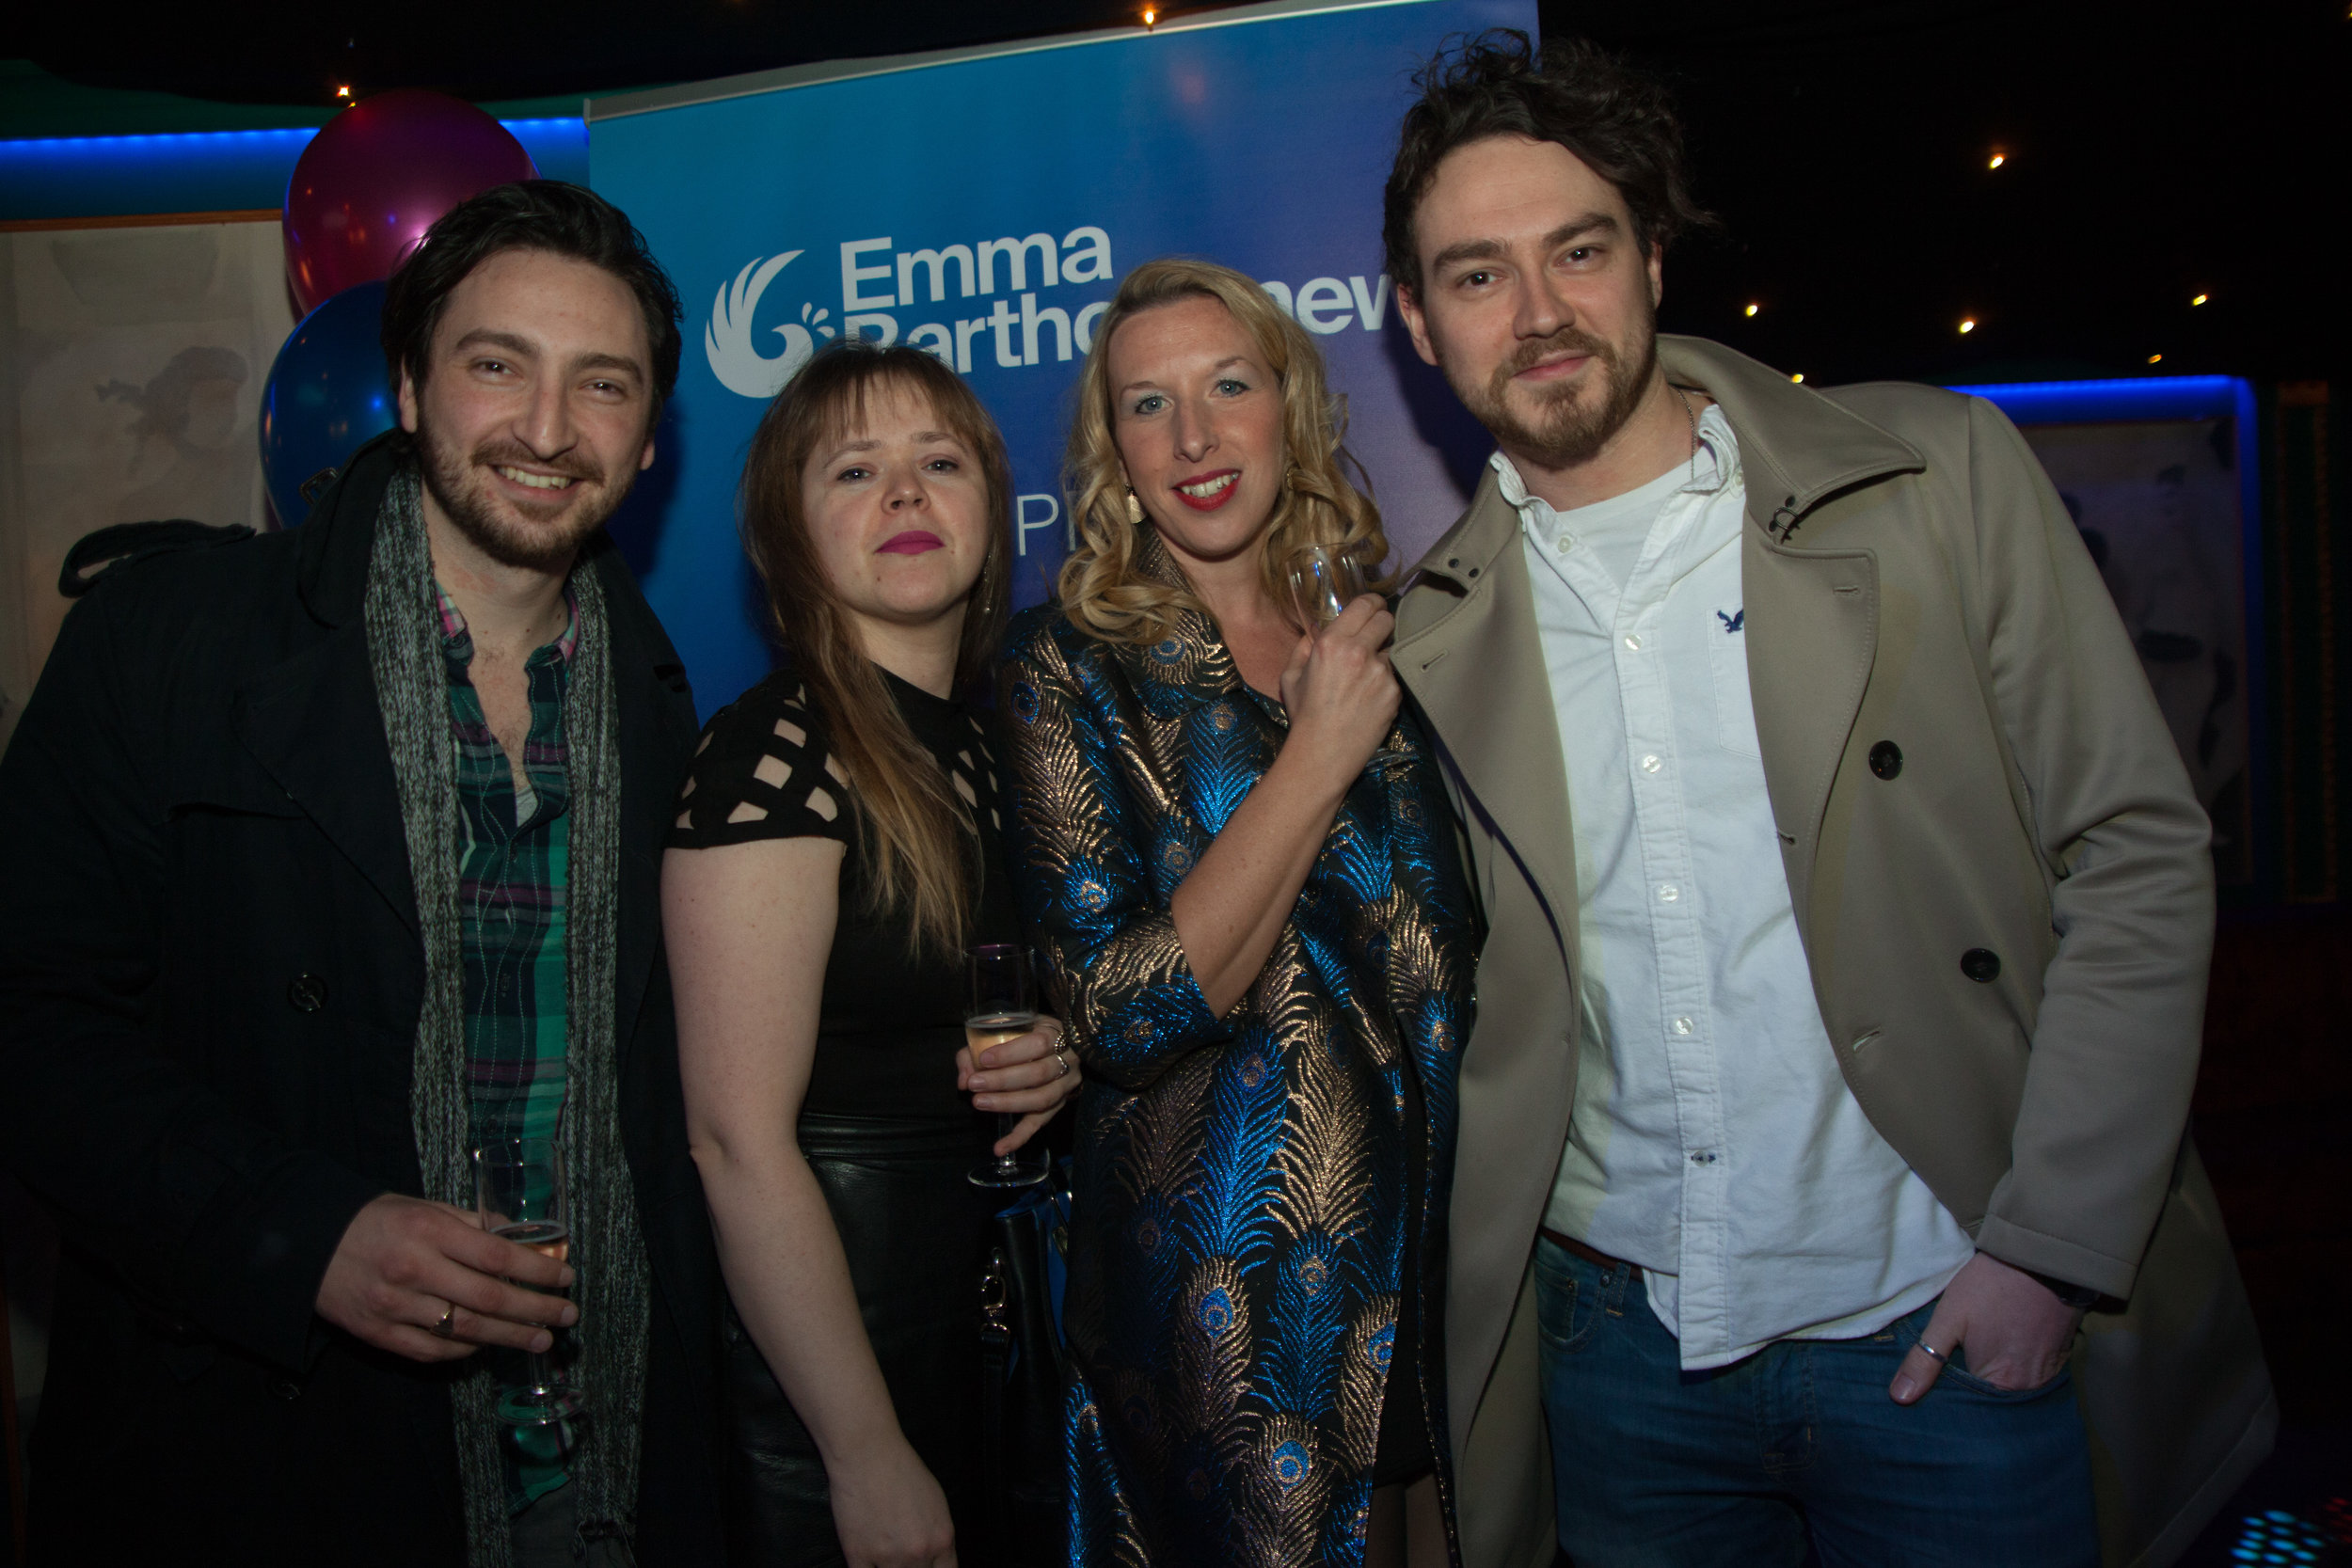 Founders of the Unsigned Music Awards with music blogger, Dovile Mal & host Emma Bartholomew at the EBPR Party